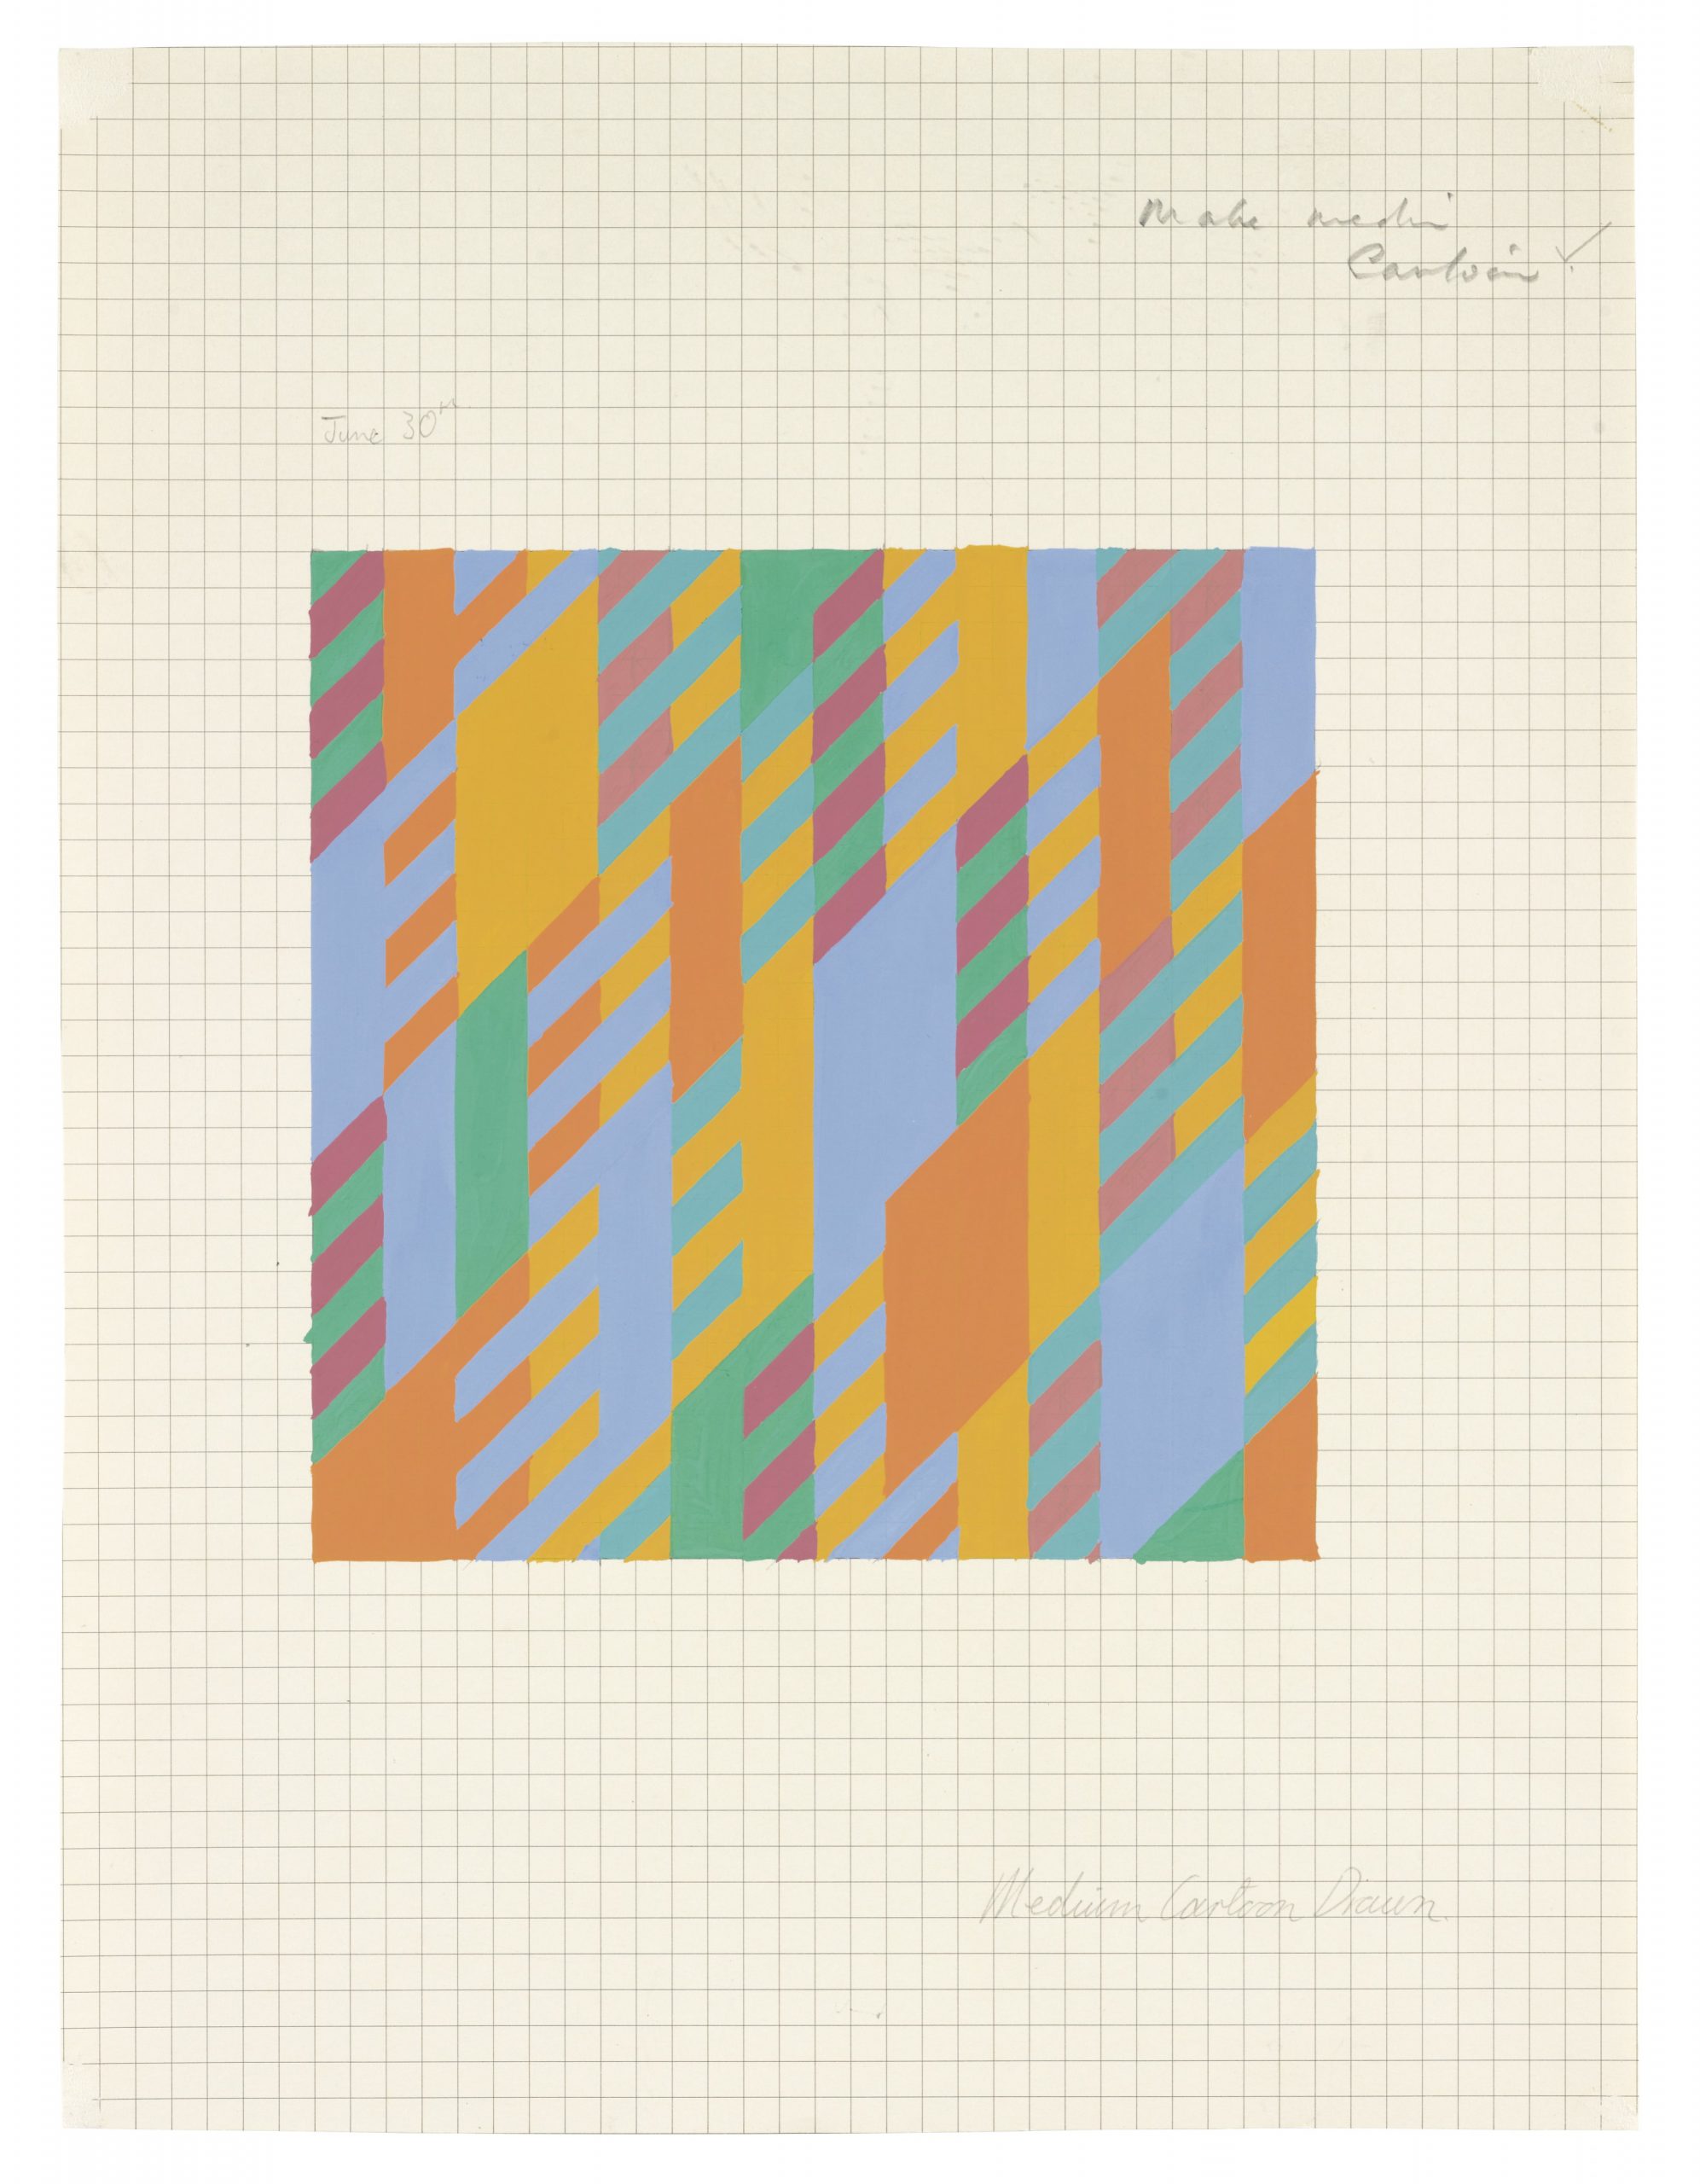 Untitled [towards Fleeting Moment], an exquisite work on paper by Bridget Riley (1986, estimate: £25,000-35,000)